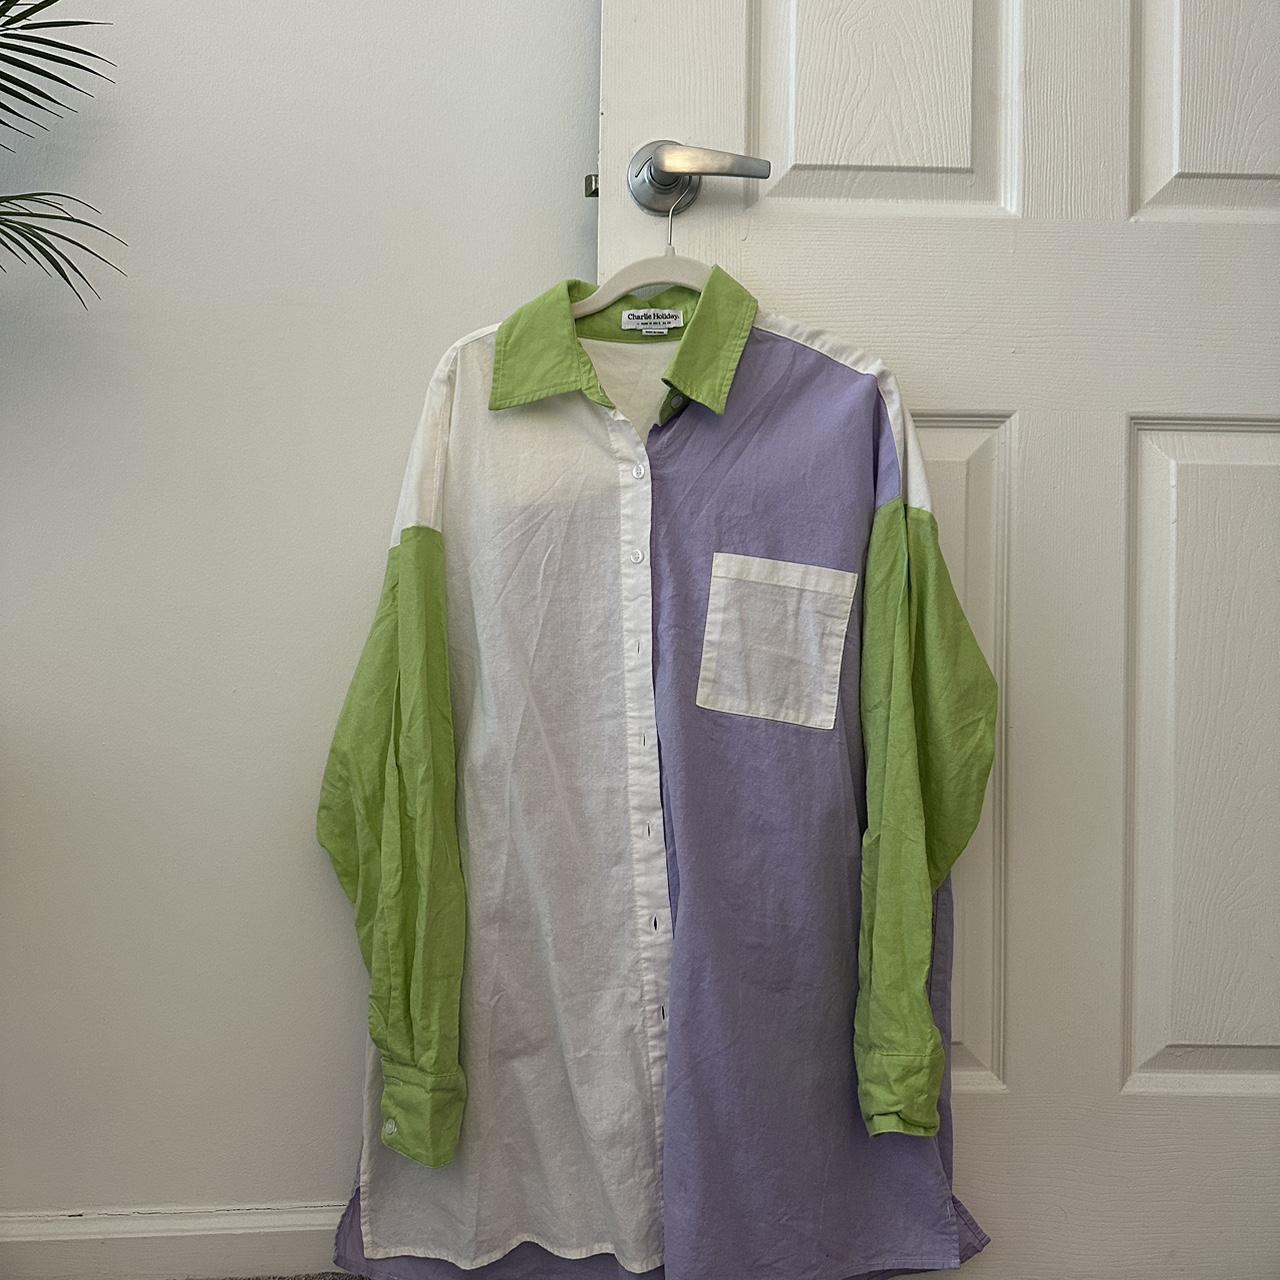 Charlie Holiday Women's Green and Purple Blouse